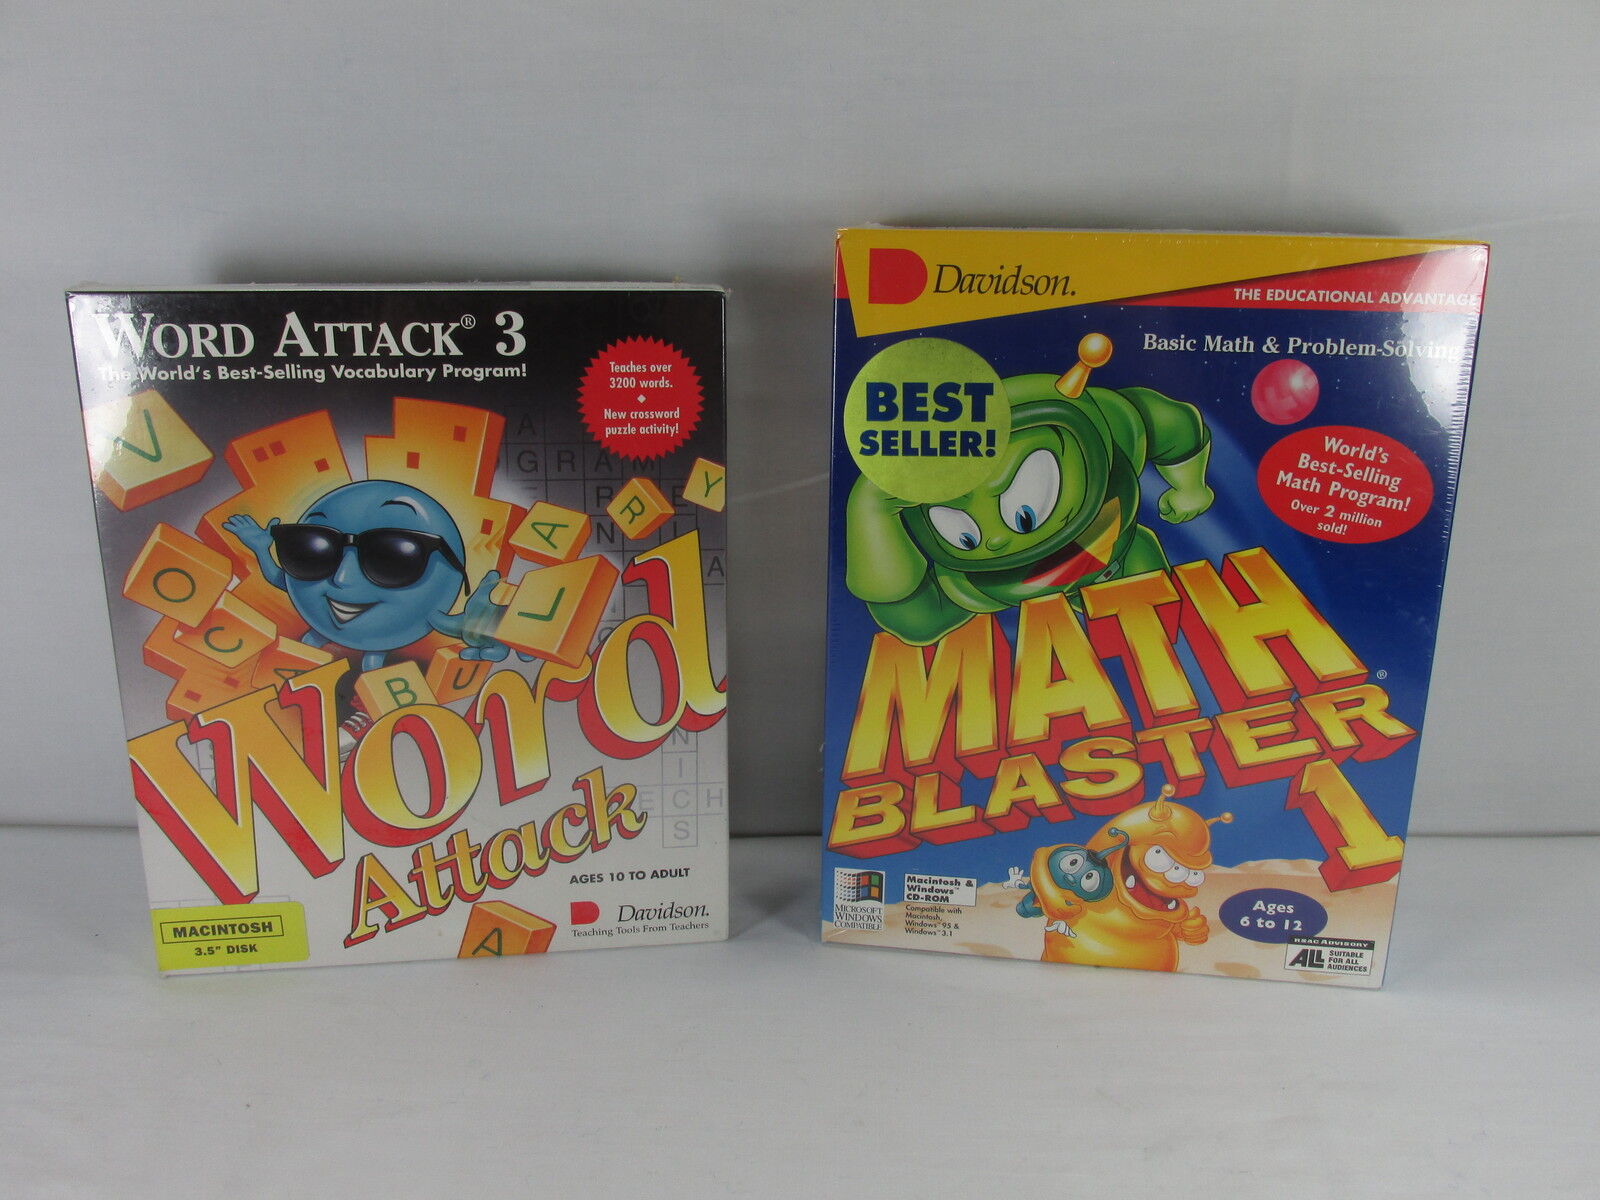 Word Attack 3 Math Blasters 1 Educational Learning Games Mac 3.5 Disk Windows 95